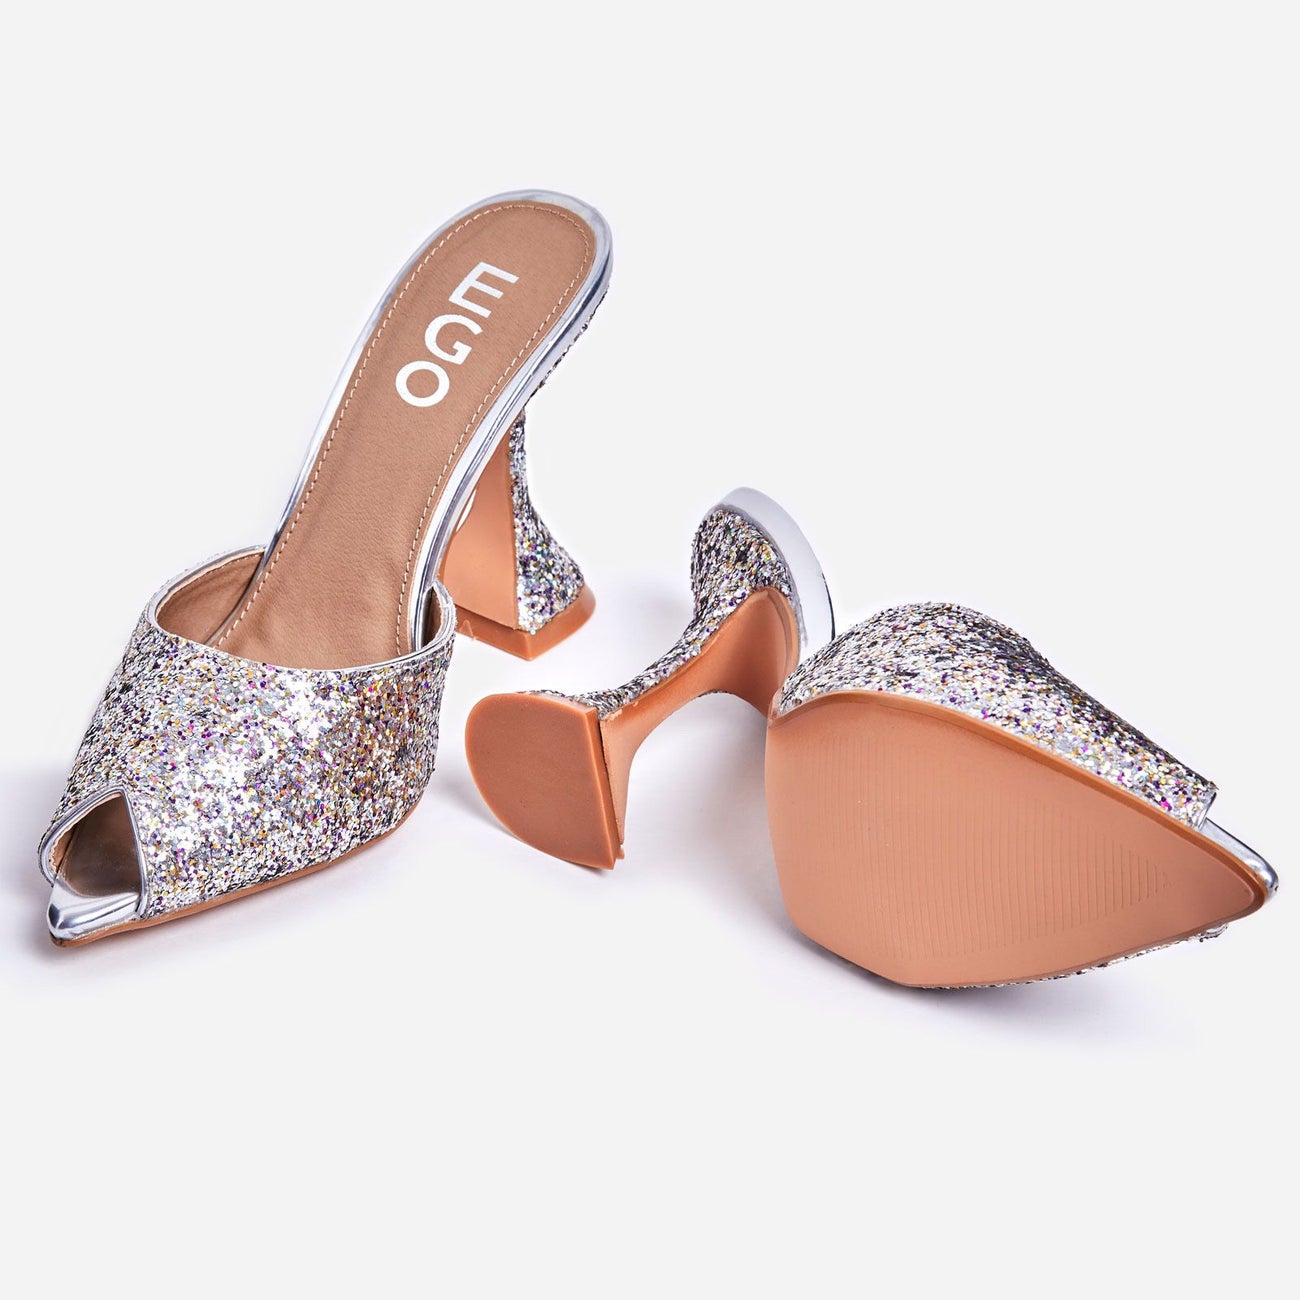 sparkly peep toe shoes